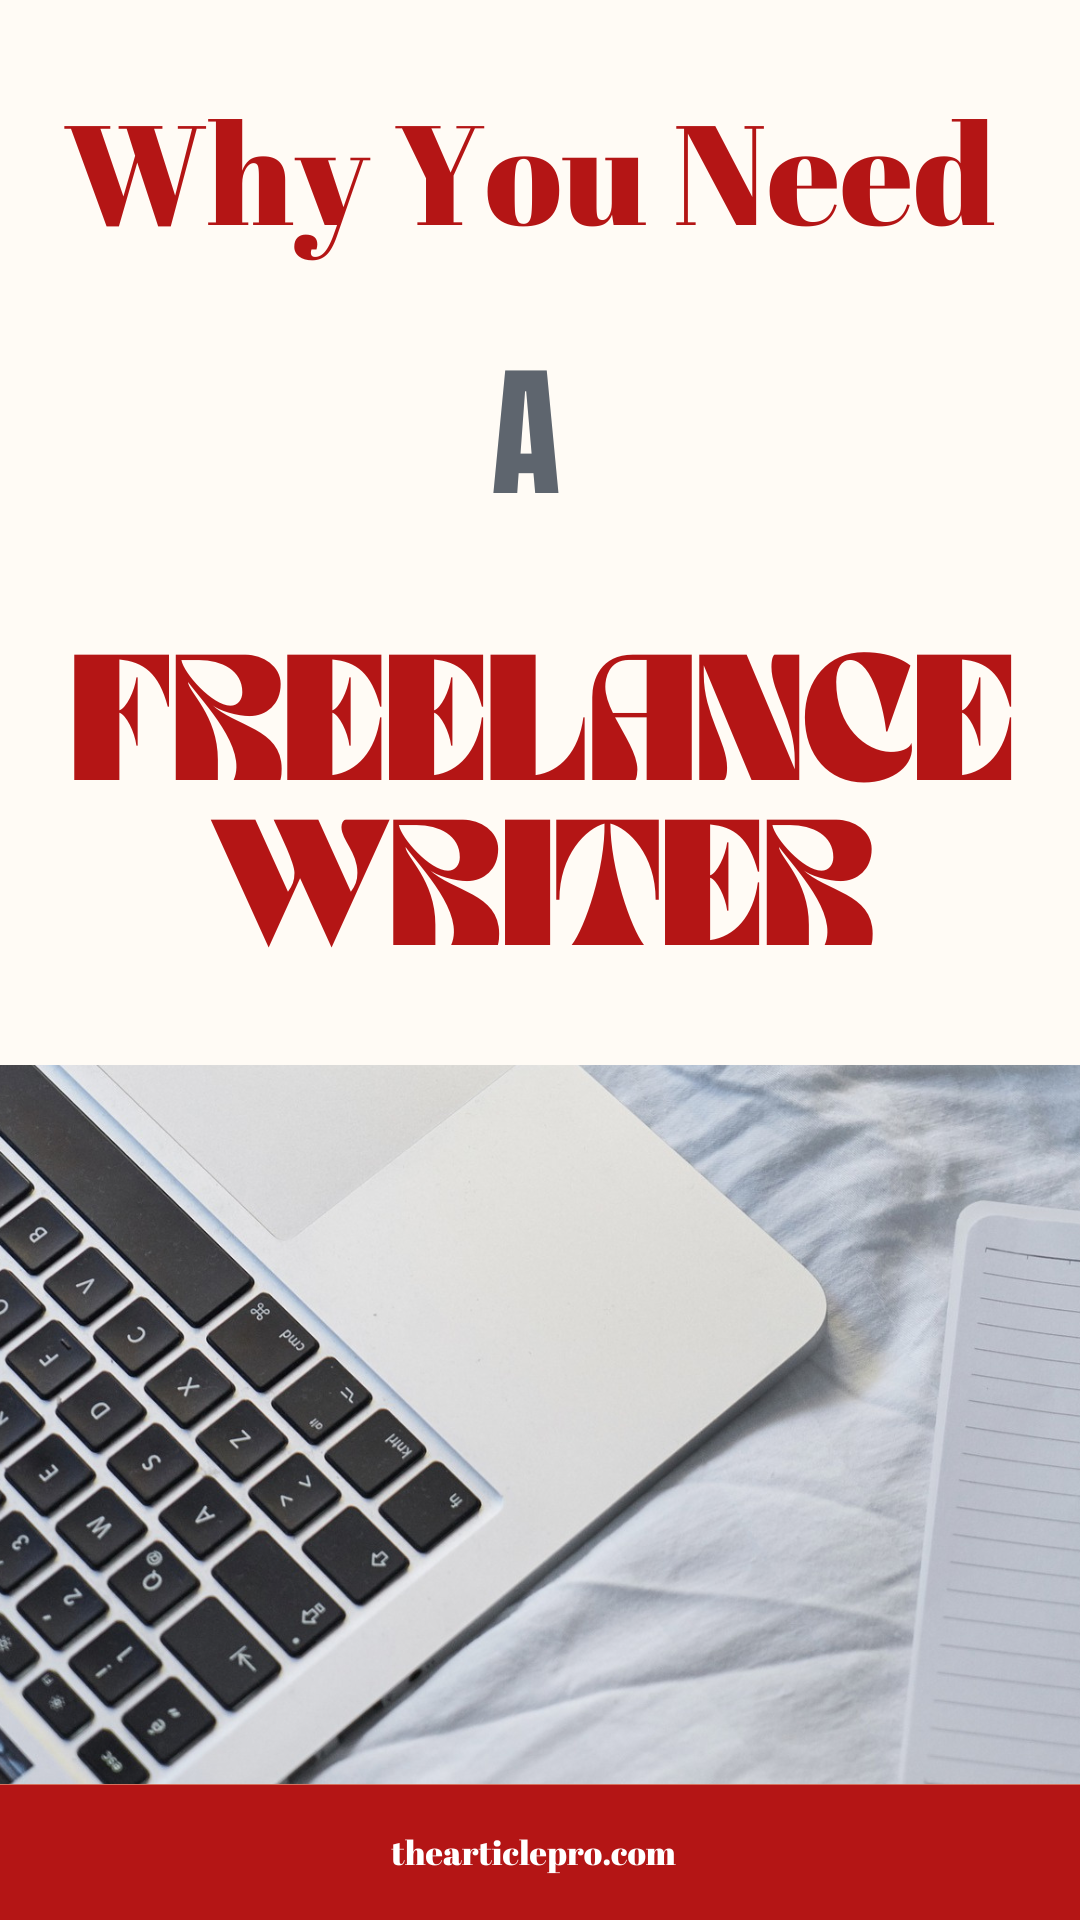 Why You Need A Freelance Writer